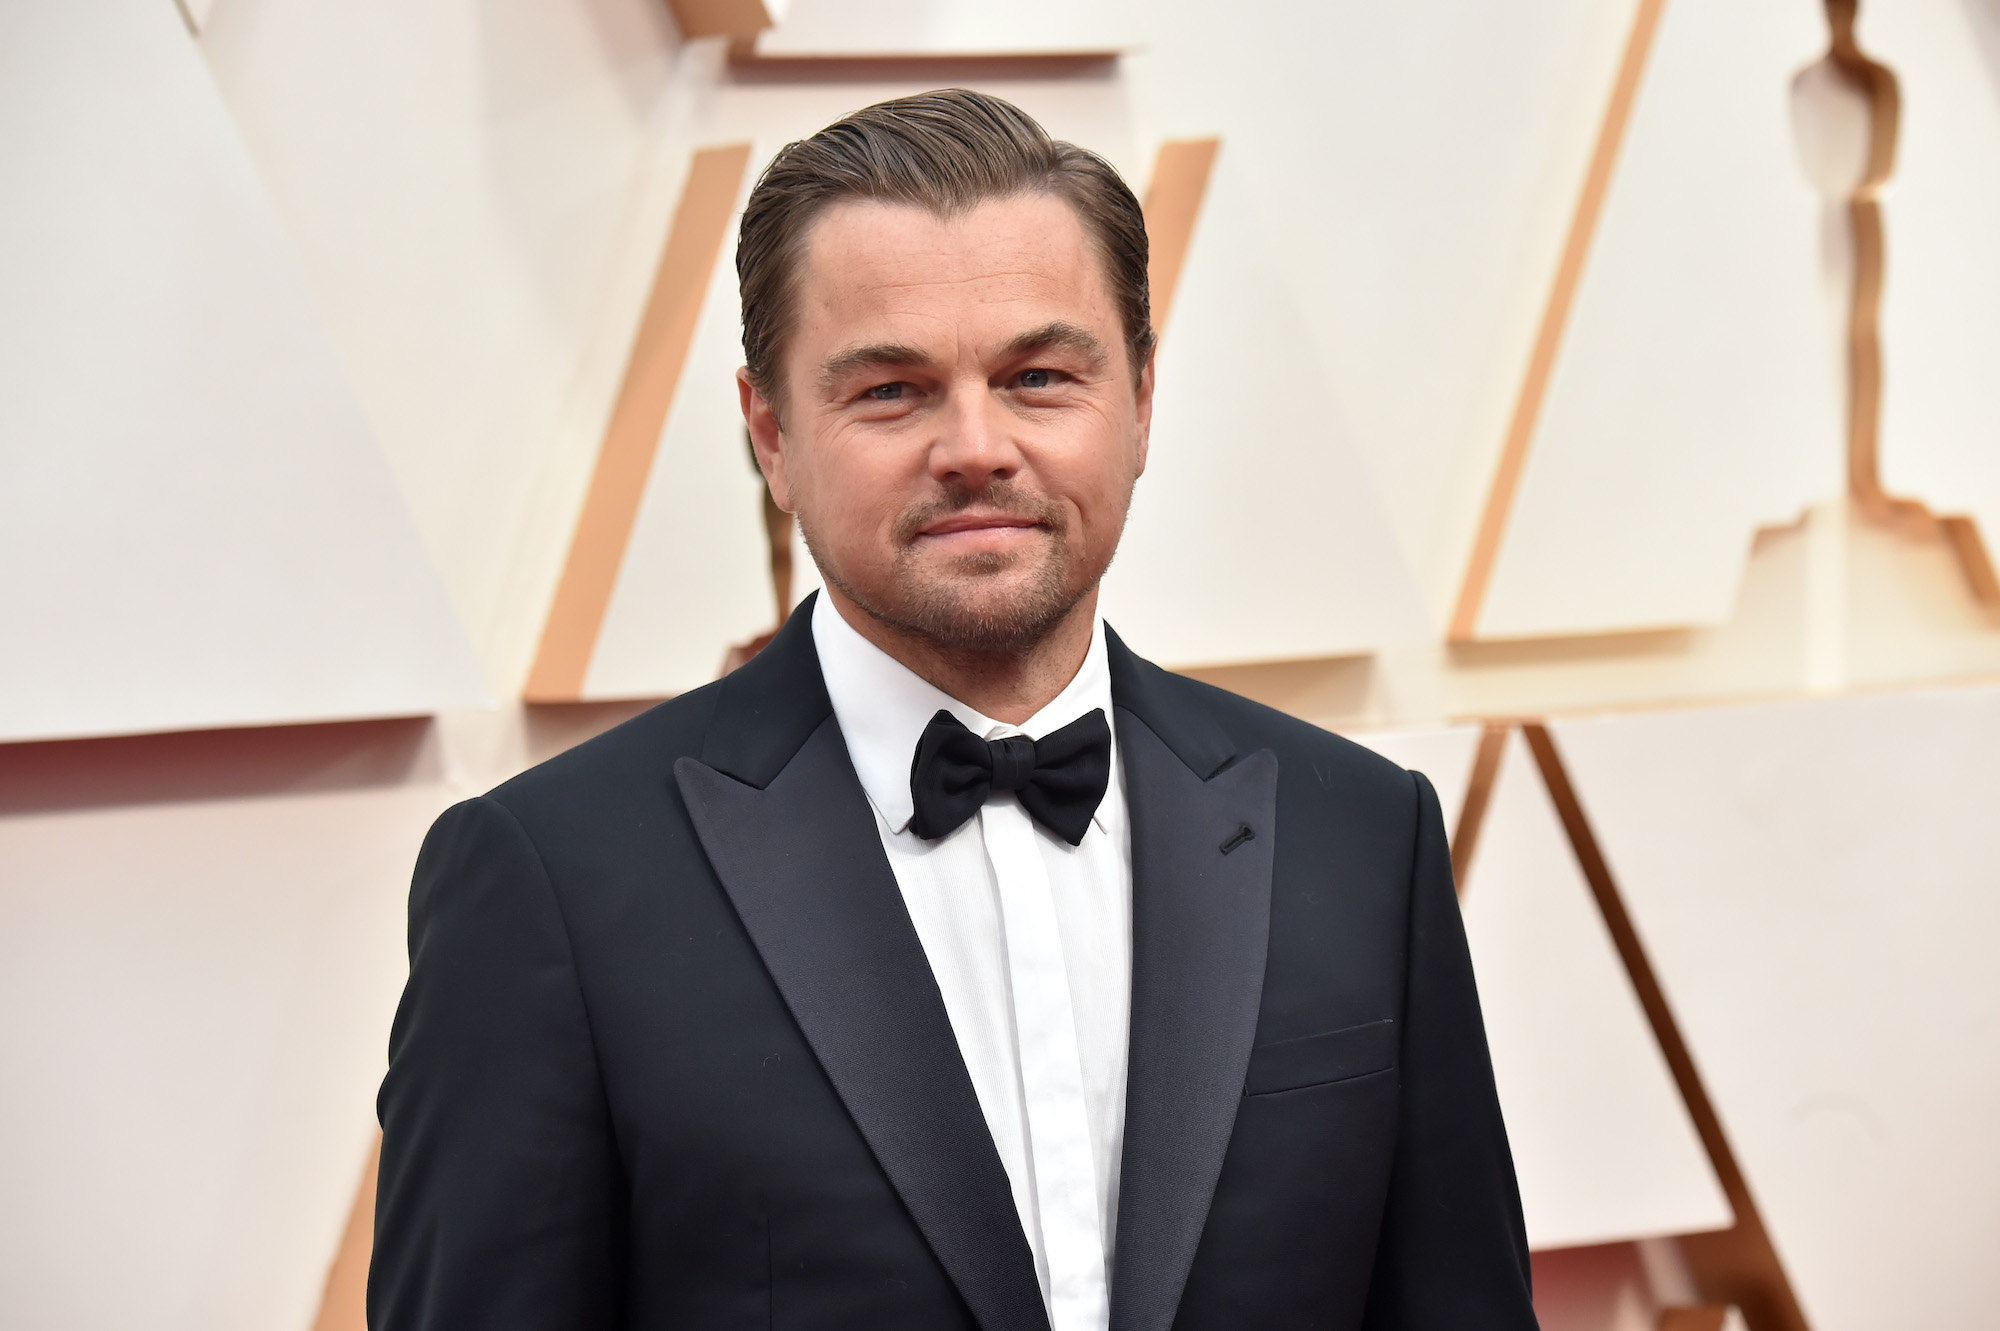 Leonardo DiCaprio smiling in front of a white background